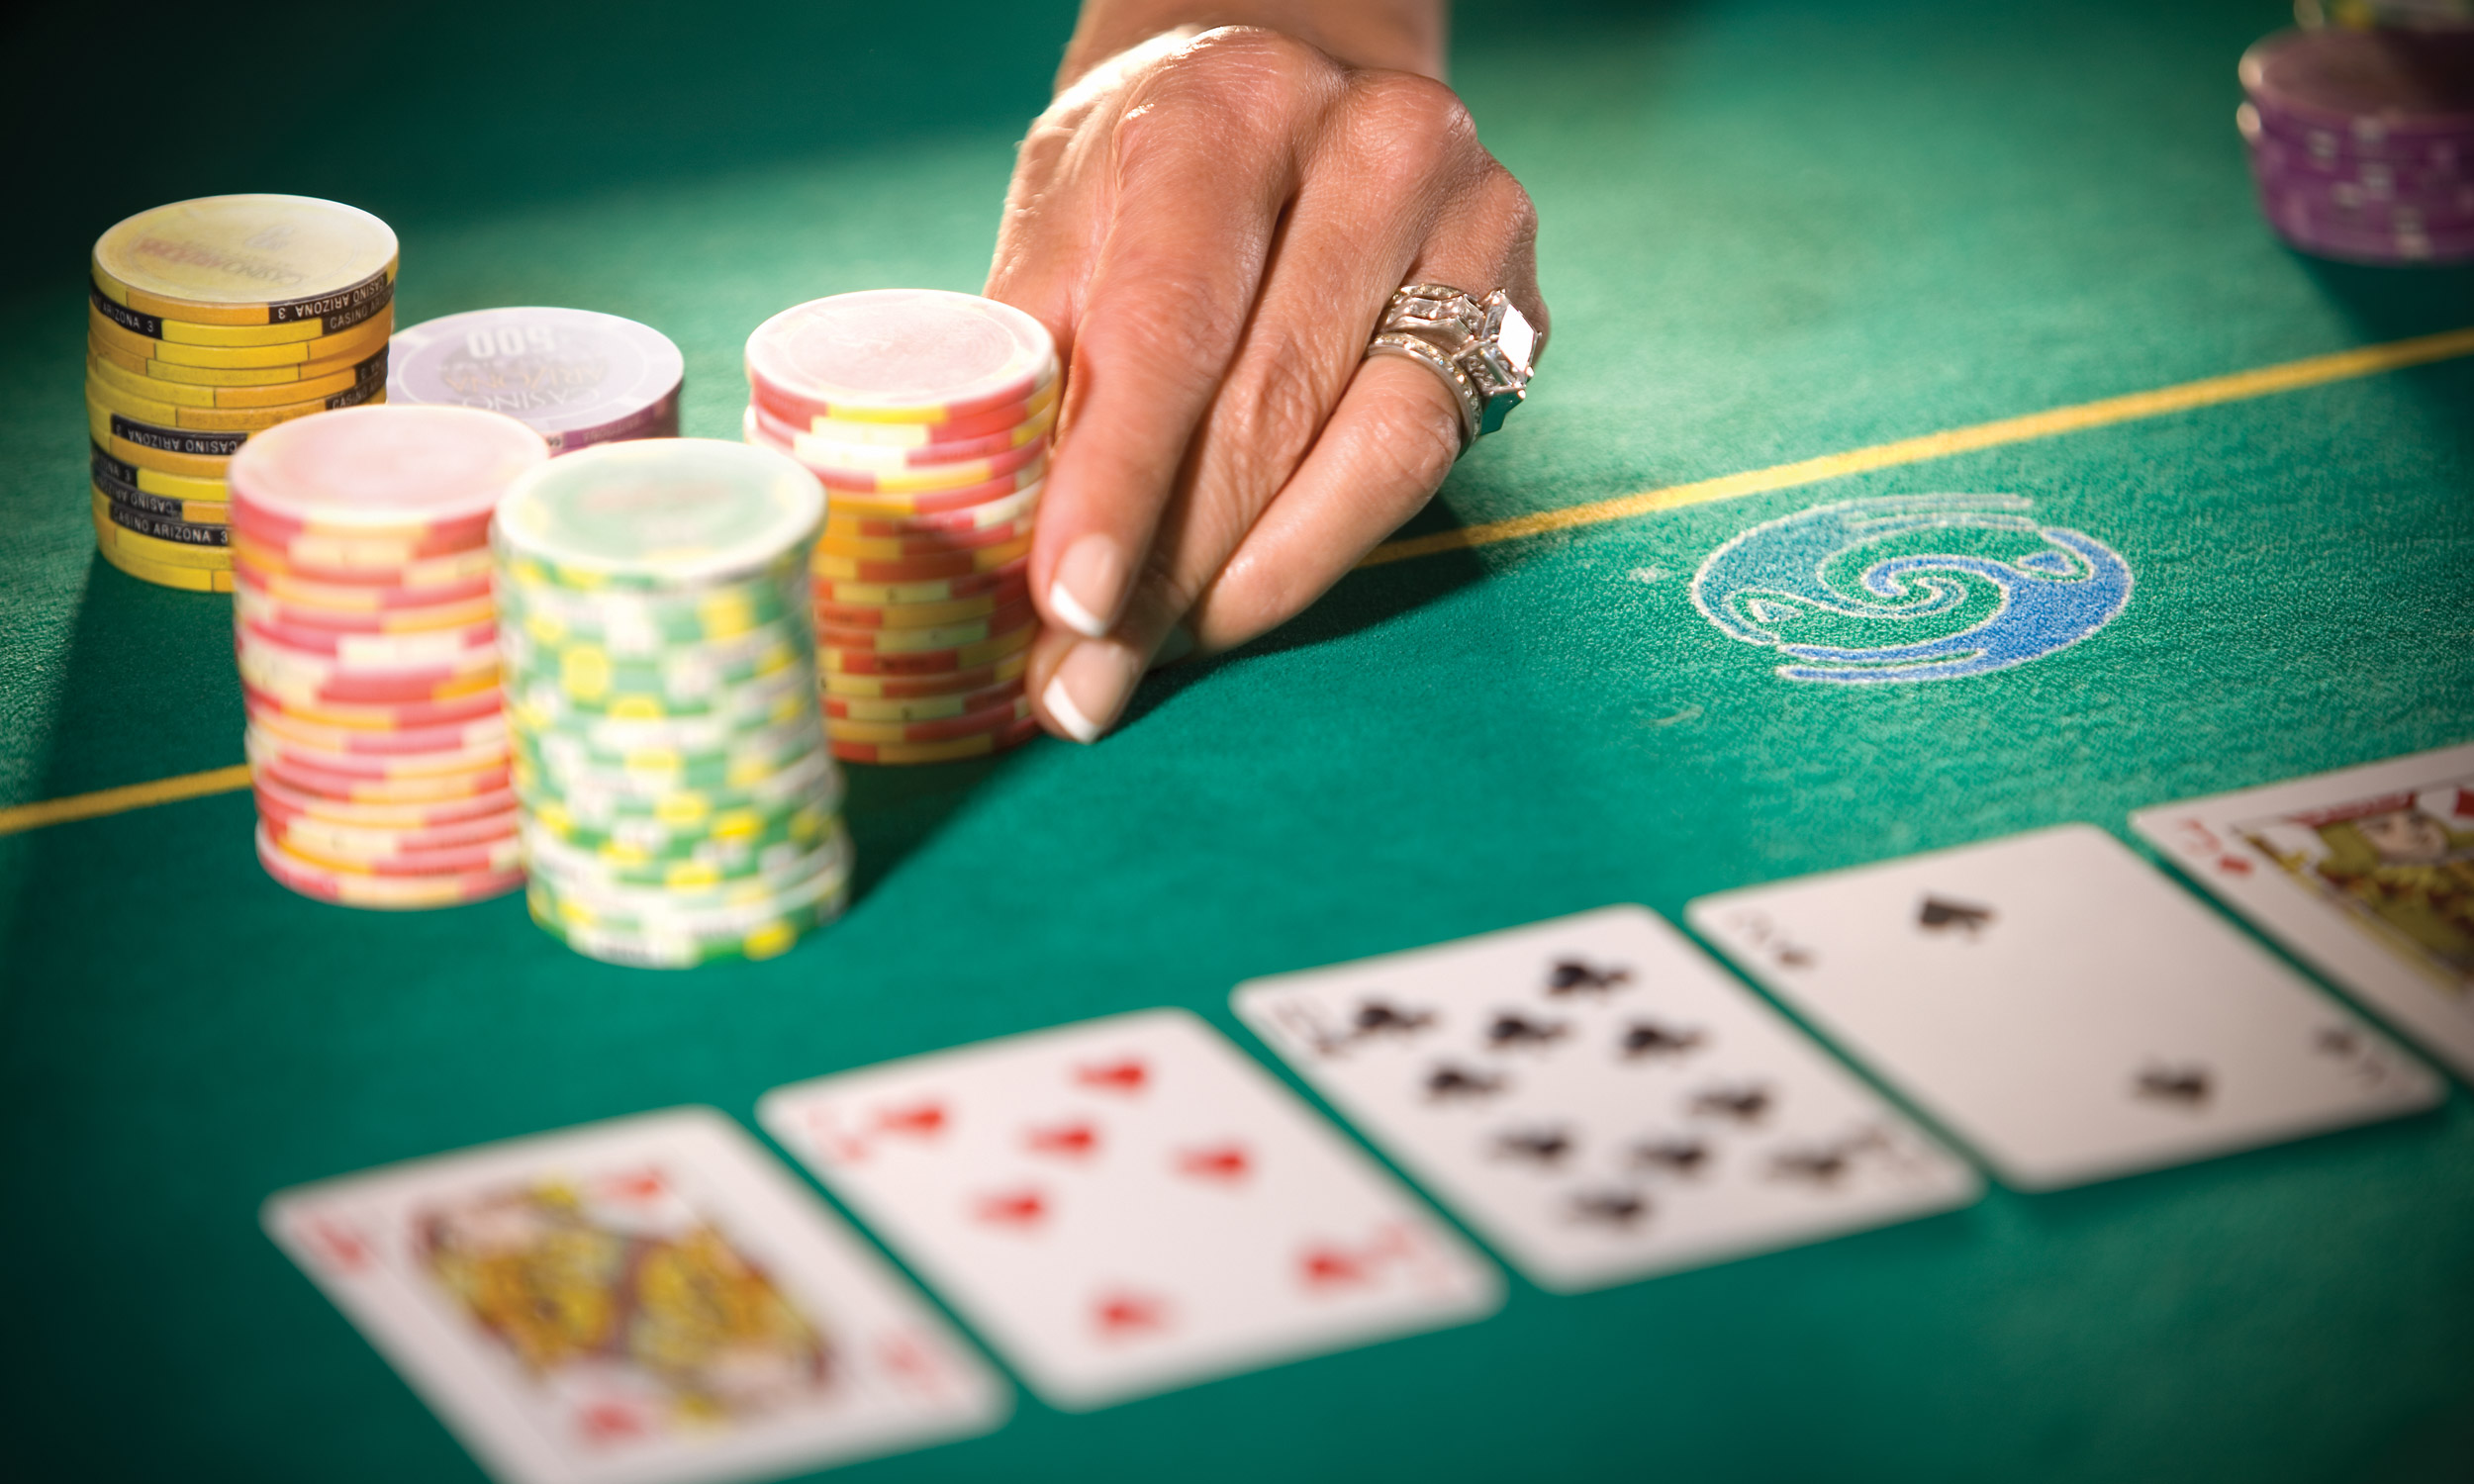 Providing satisfaction to the players in the online casino sites